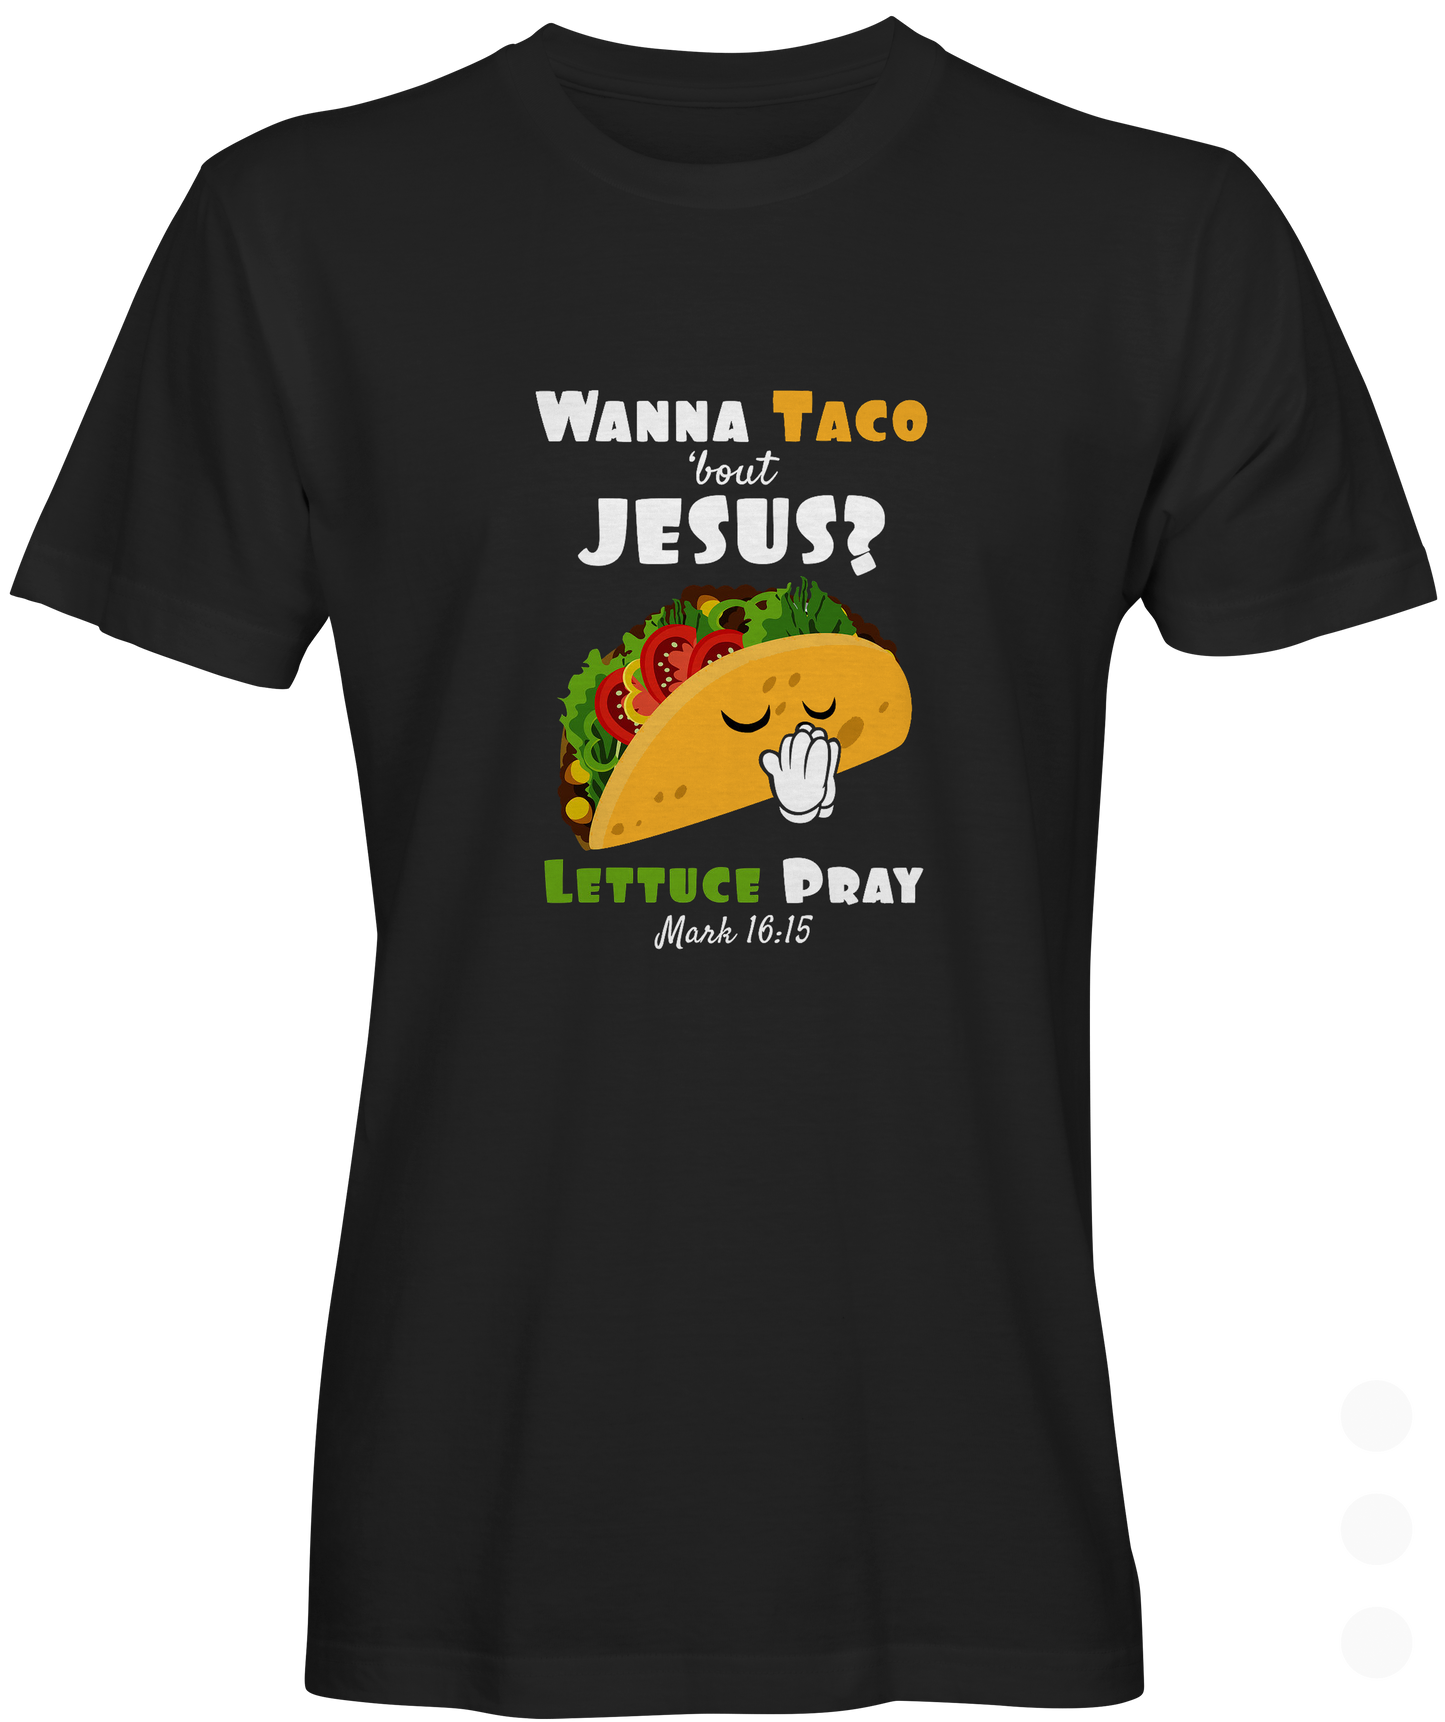 Black T-shirt with taco picture